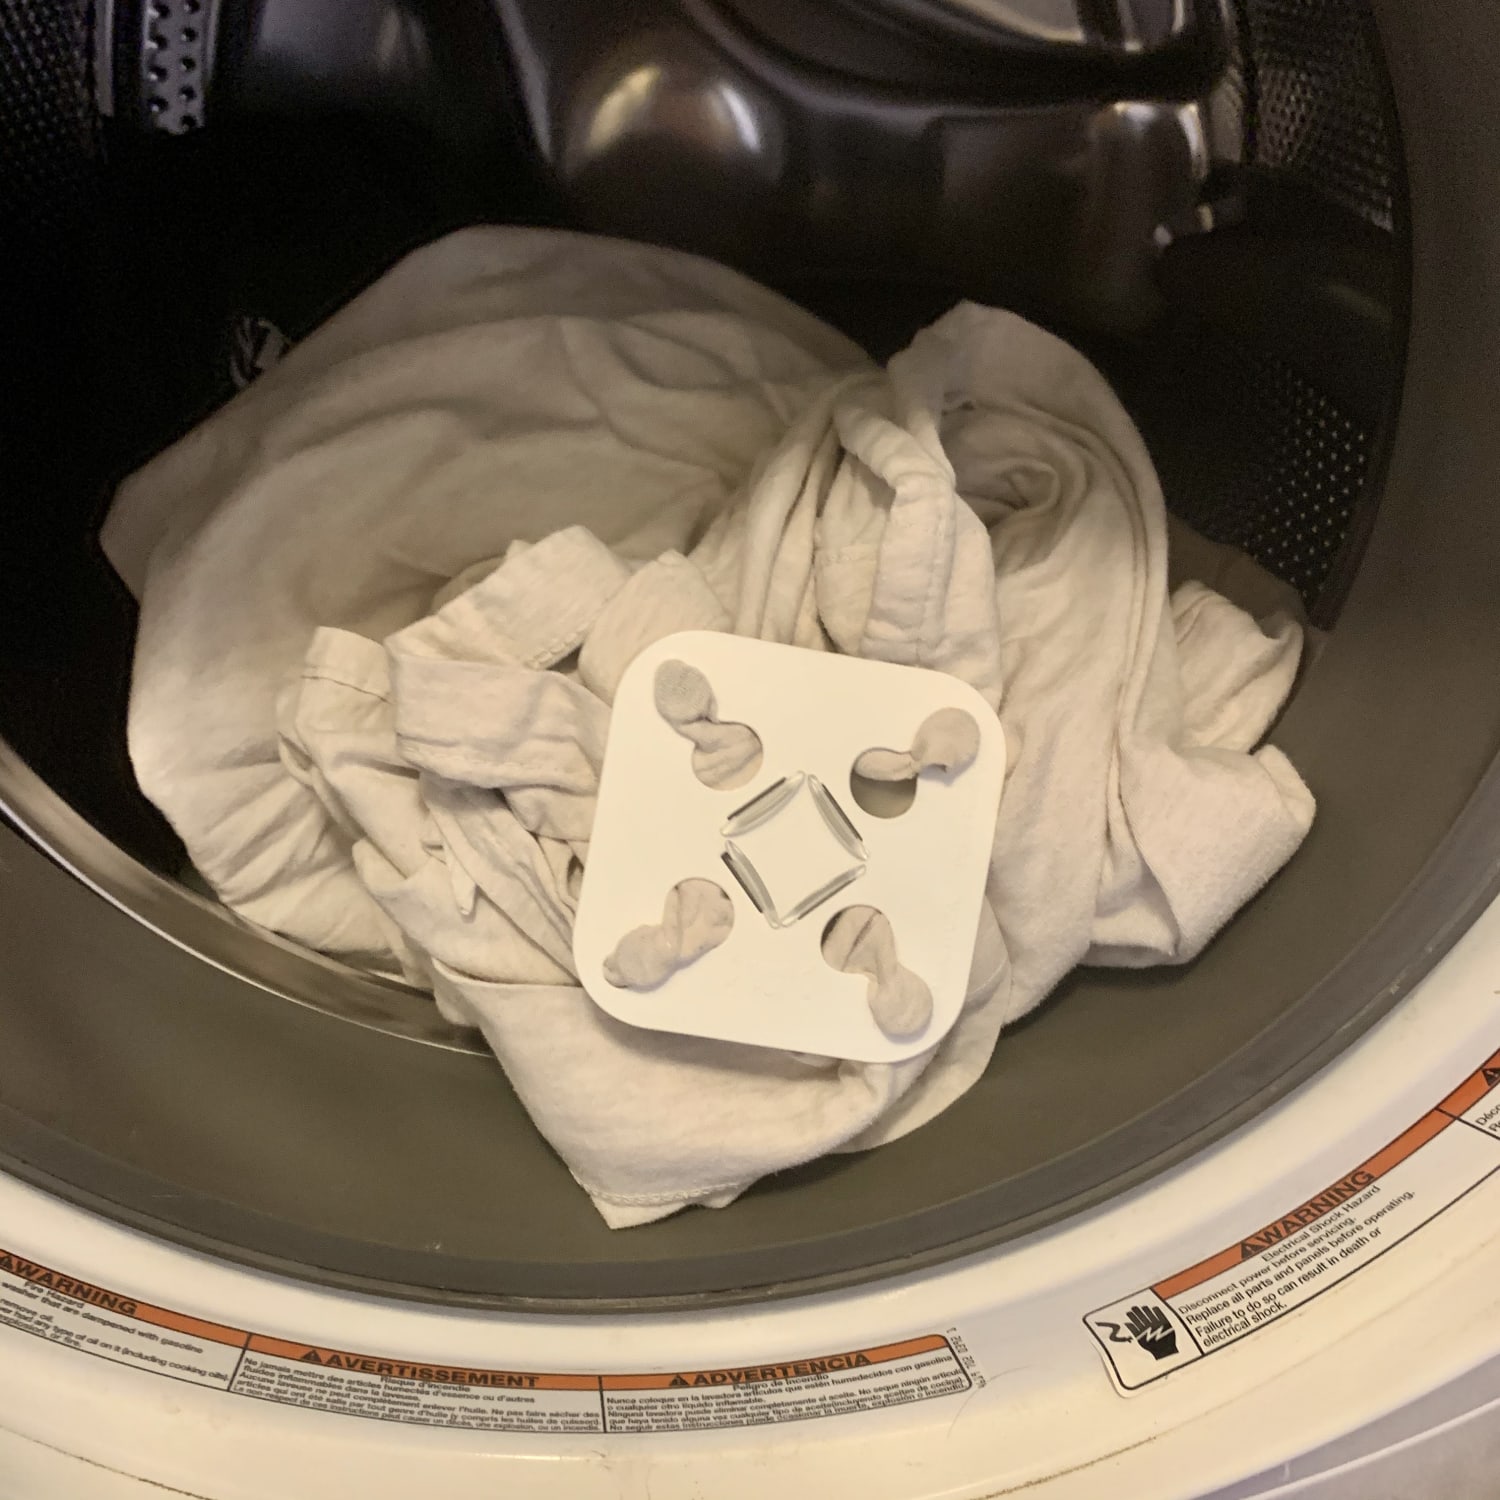 https://media-cldnry.s-nbcnews.com/image/upload/newscms/2020_48/1640793/wad-free_in_the_washer-wad-free_review-231120.jpg